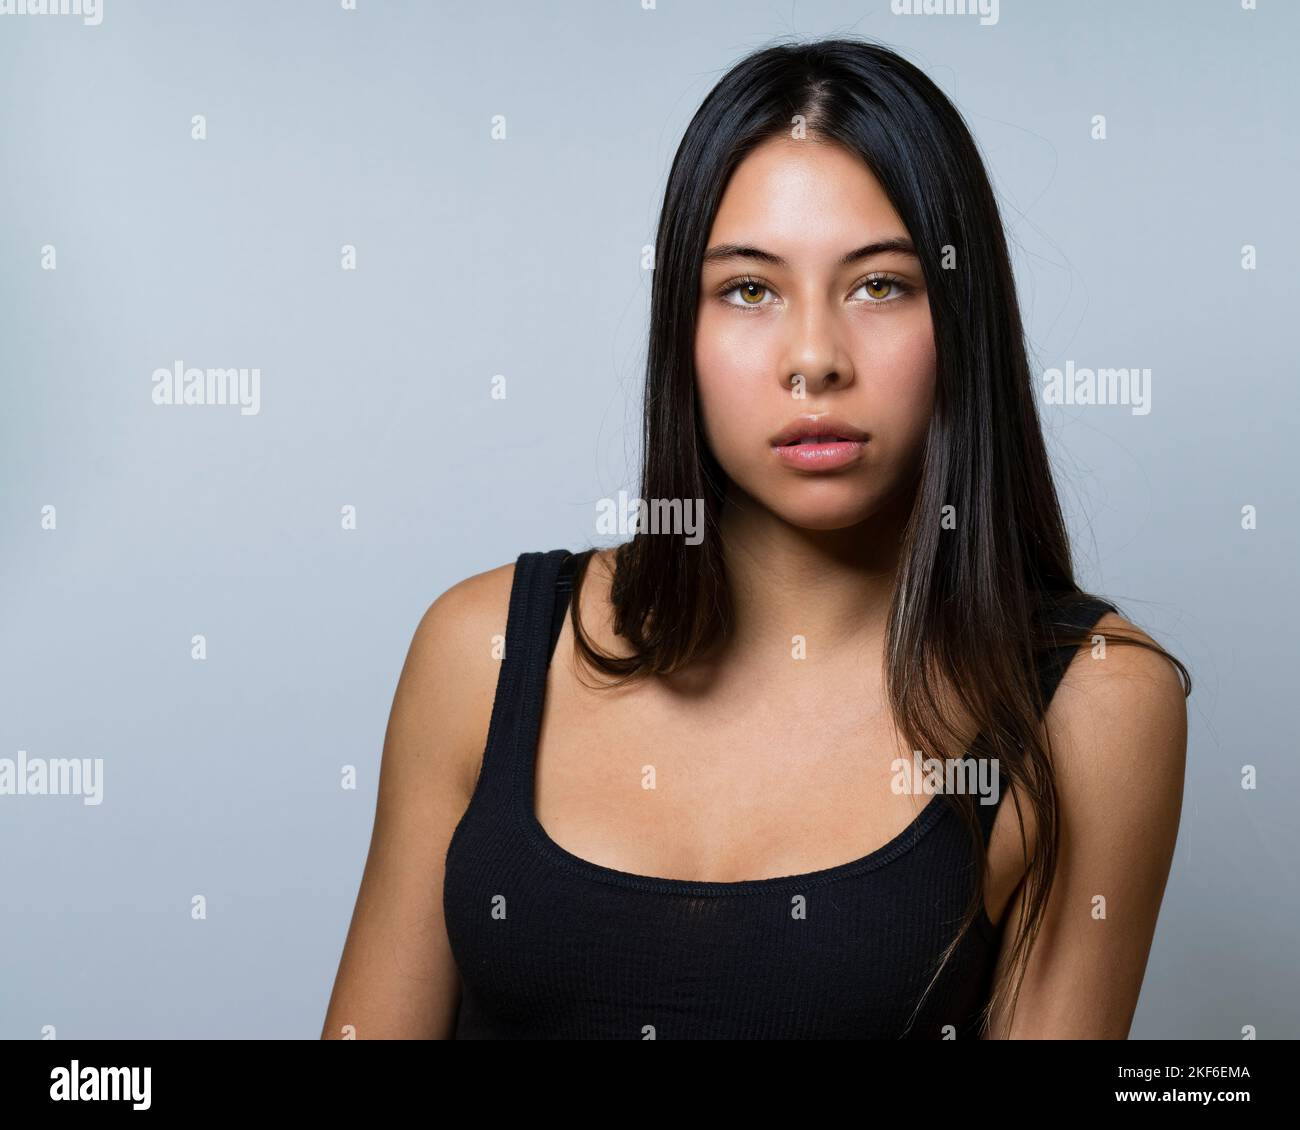 Close up of Multiracial Teen Female Seated with Intense Eyes and Long Hair 90s Vibe Stock Photo